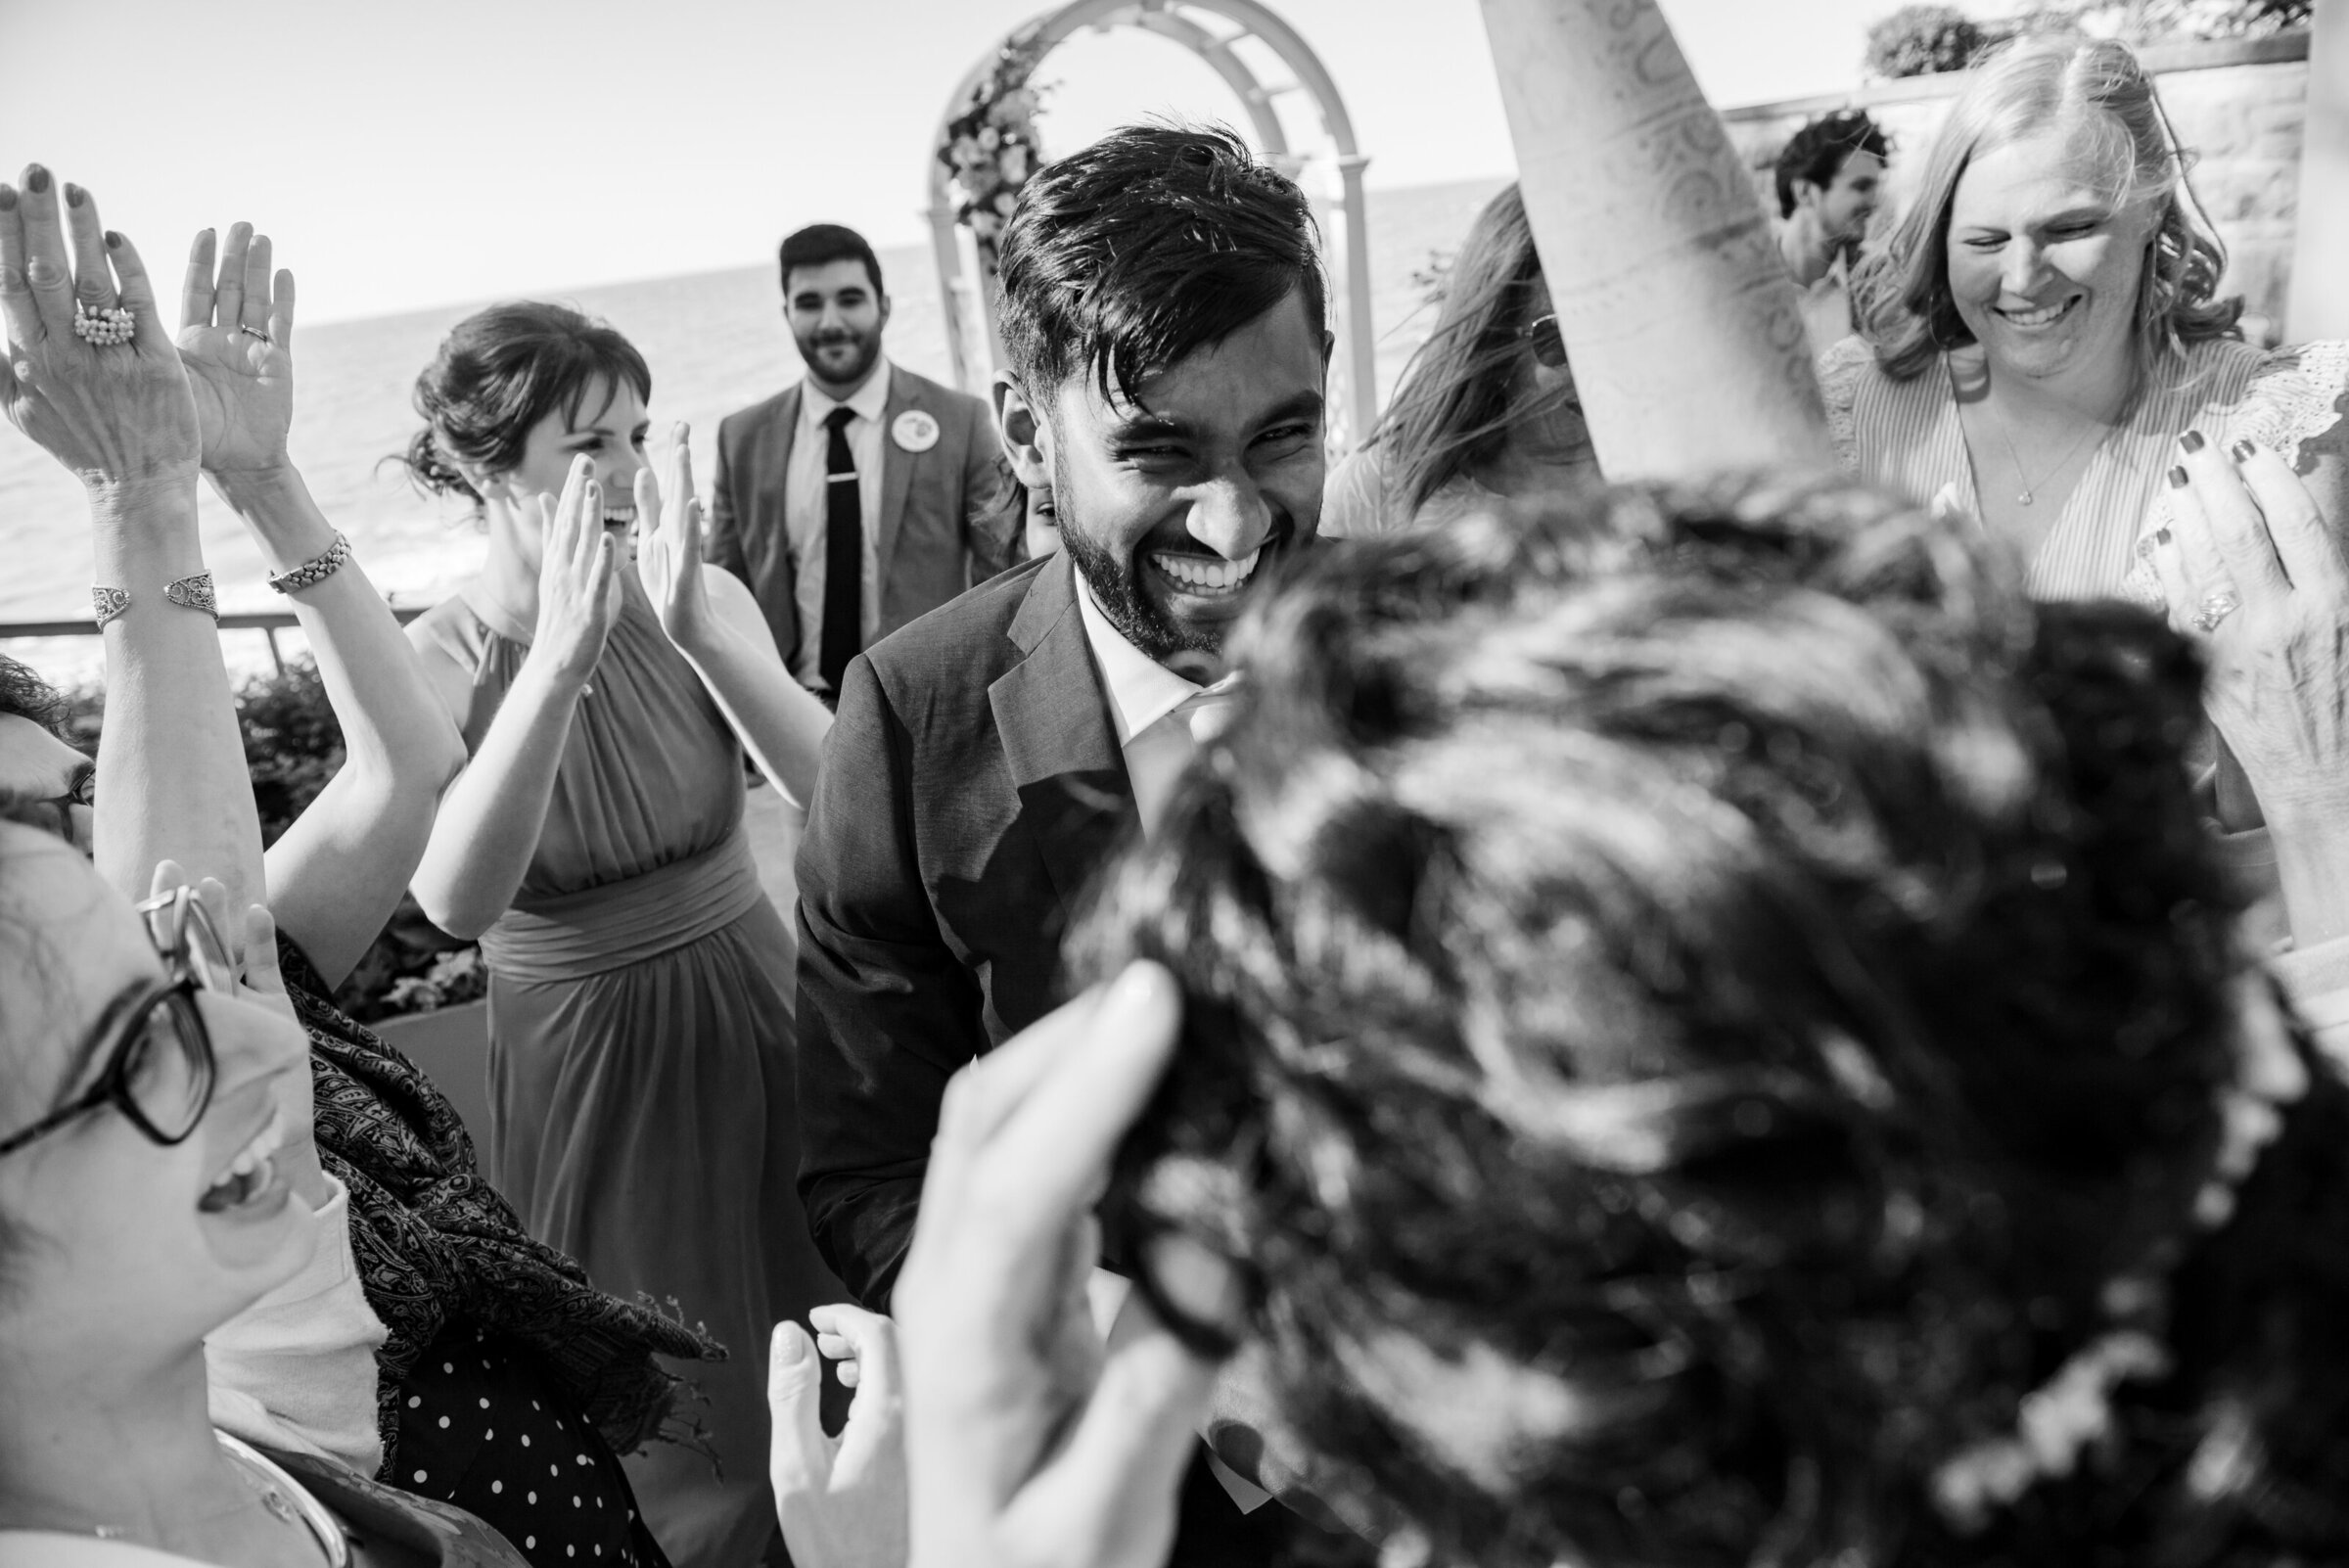 groom shares a dance with his bride on their wedding day, surrounding by all their friends and family during a private lakeside wedding. Photo taken by Pittsburgh Wedding photographer Aaron Aldhizer